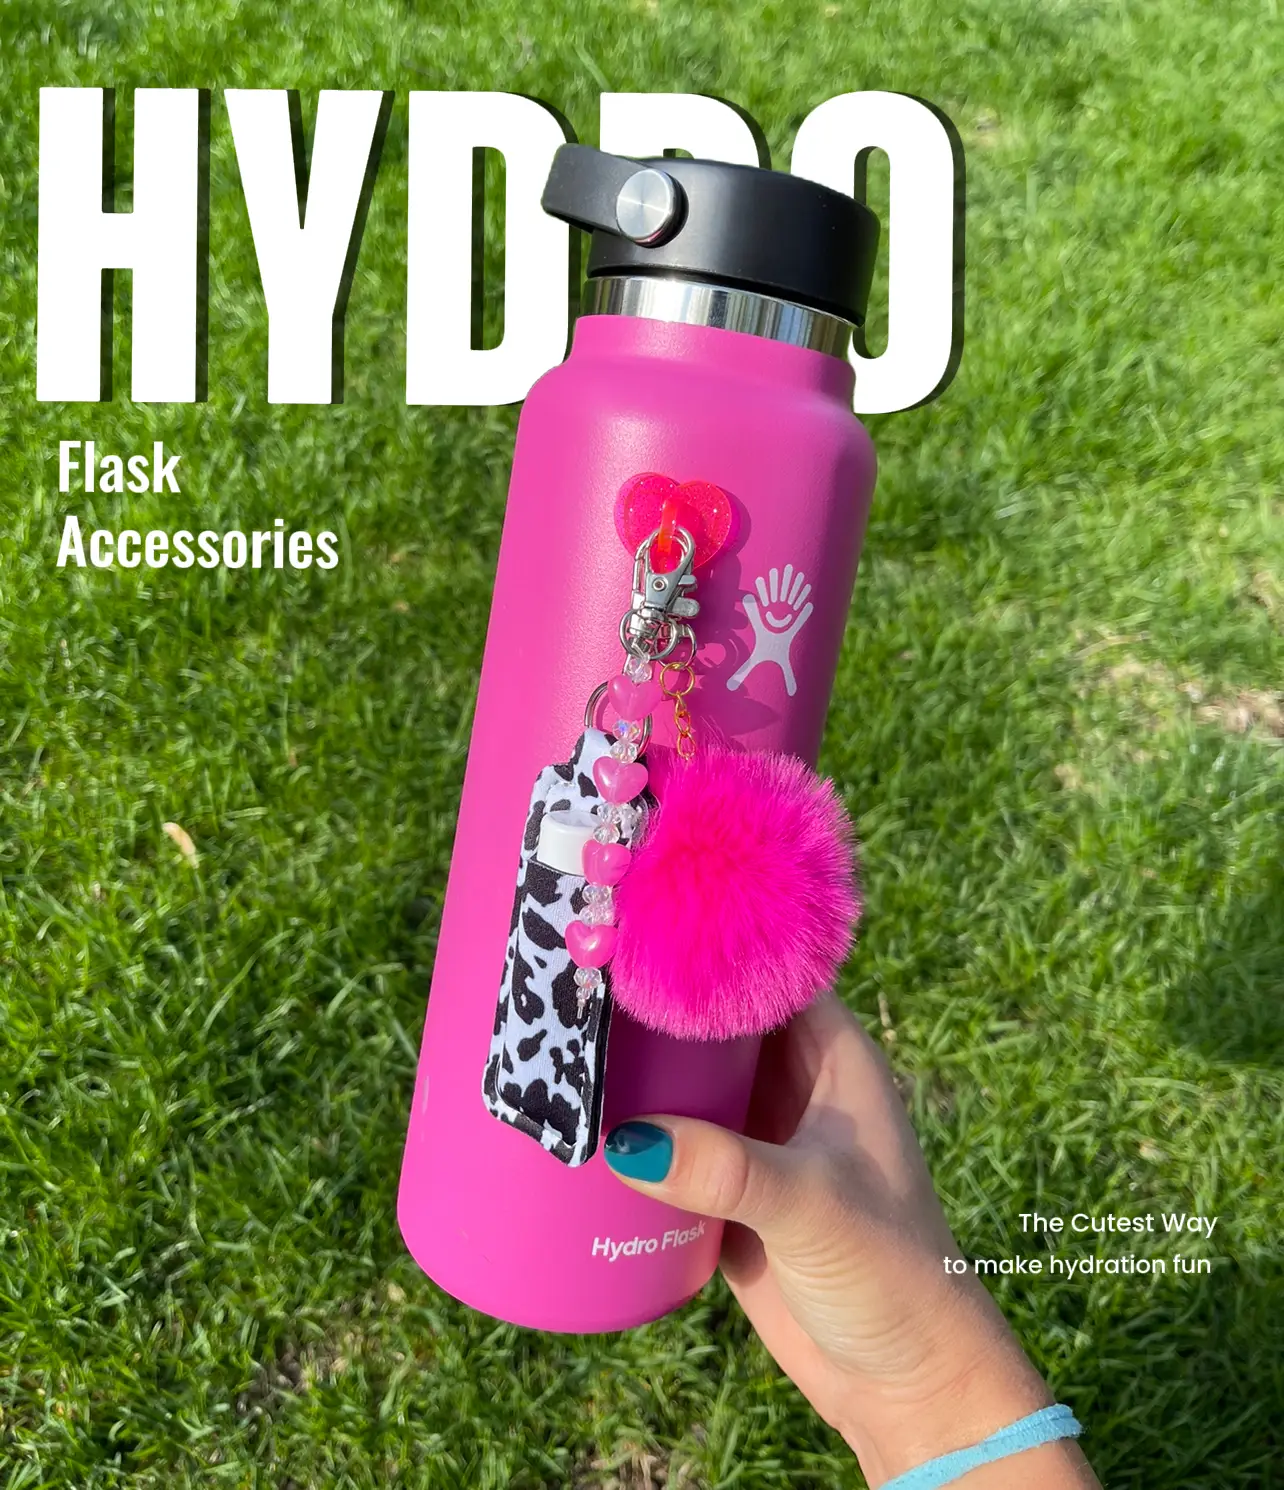 Stay hydrated with this adorable pink Hydroflask!